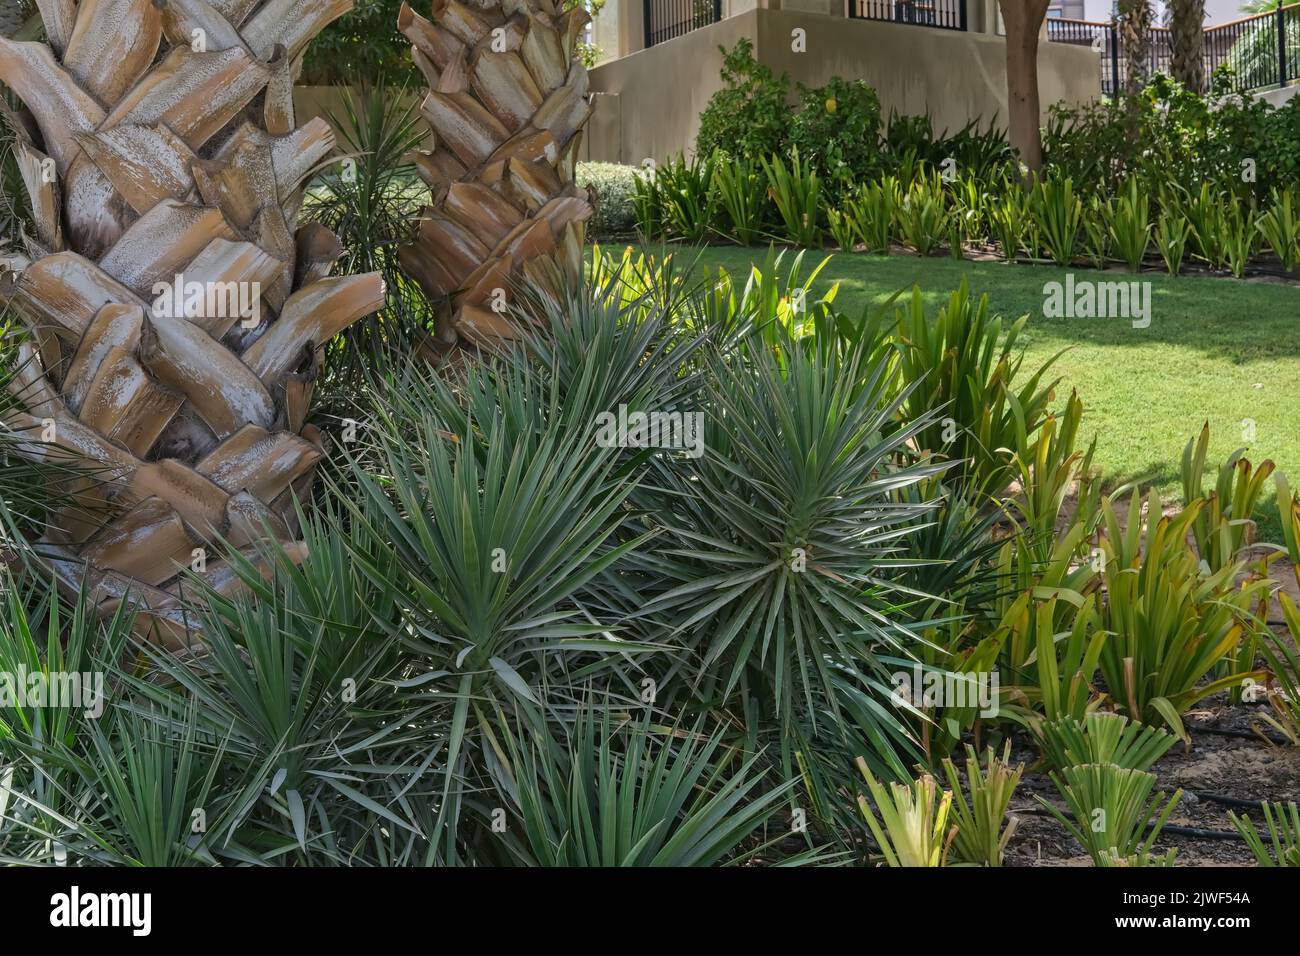 Green recreation area in urban park with classic decorative desert plants and palm tree trunk close up as background Stock Photo